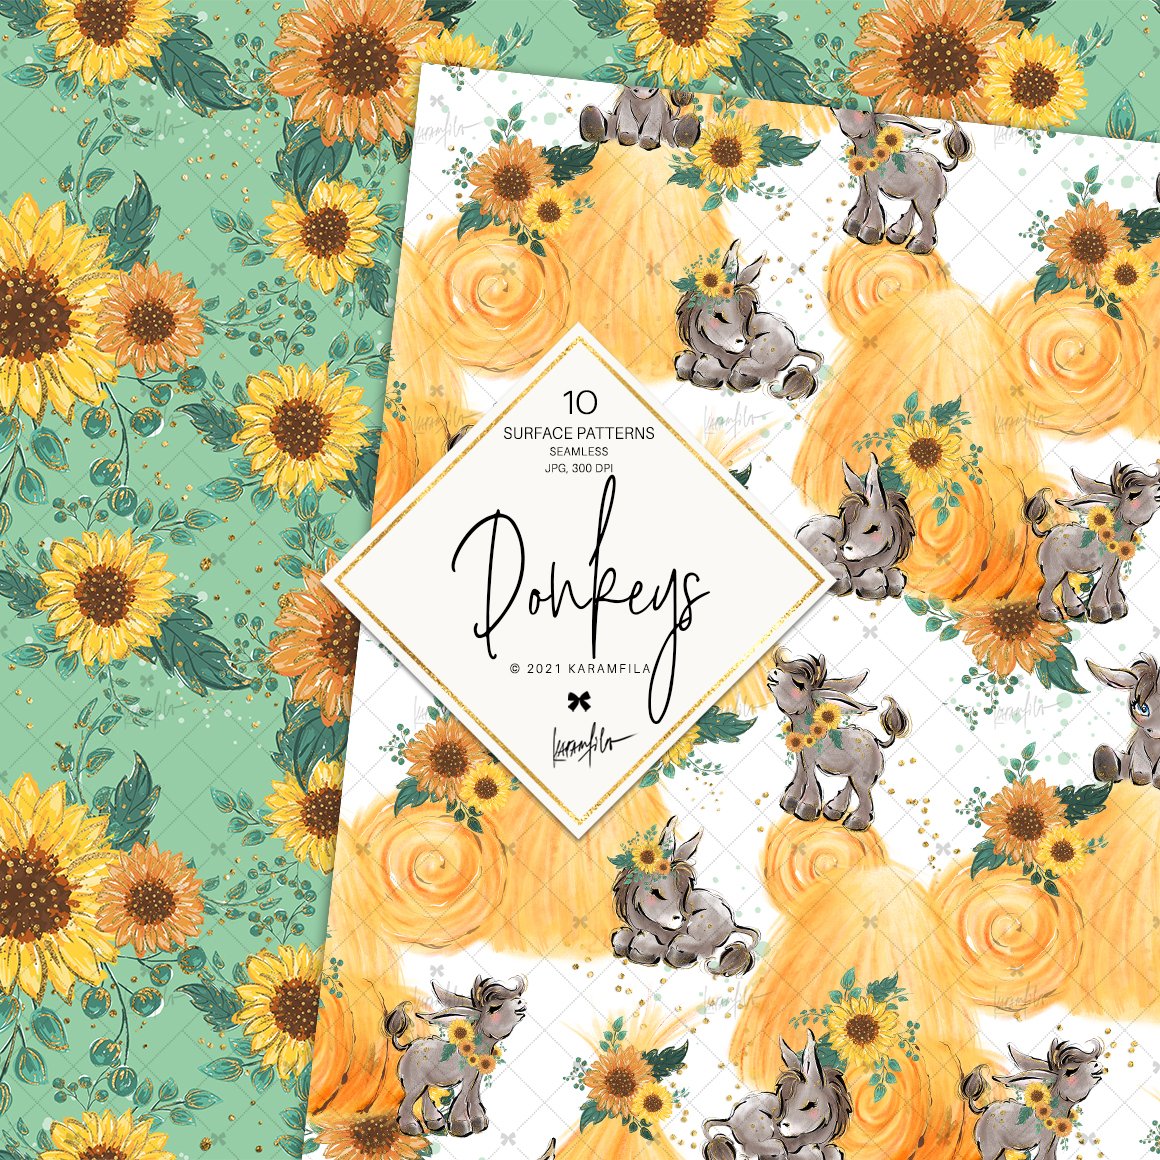 So blossom patterns with the sunflowers and farm donkeys.